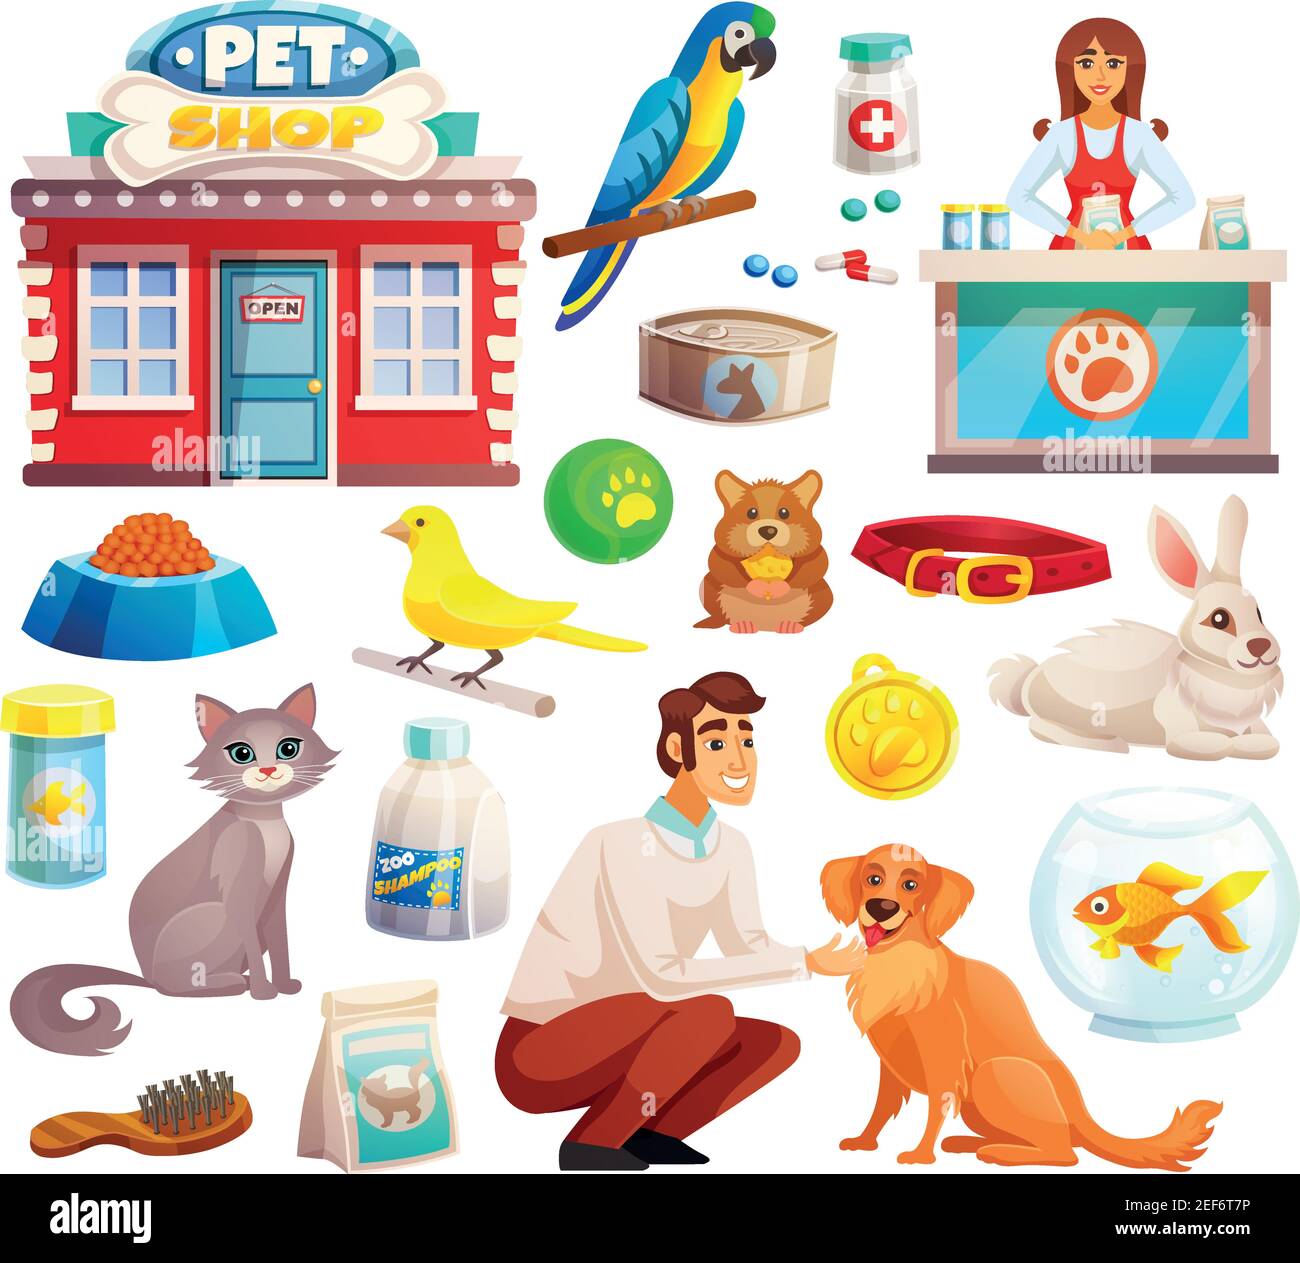 Pet shop decorative icons set with parrot rabbit dog and cat icons and goods for pets cartoon isolated vector illustration Stock Vector